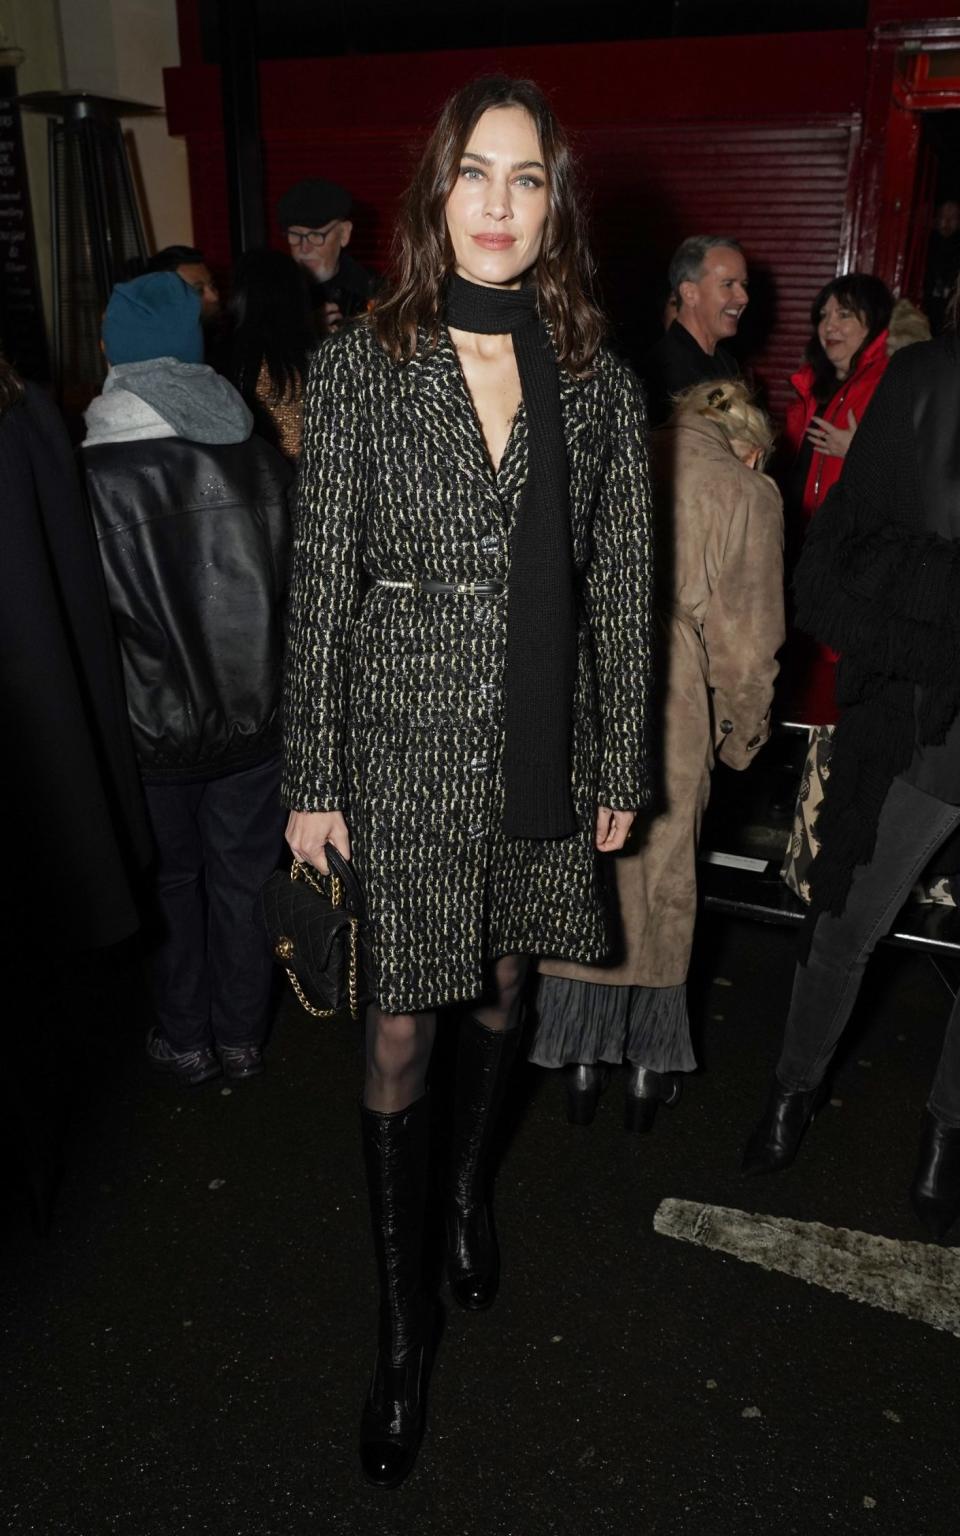 Alexa Chung was among those in attendance